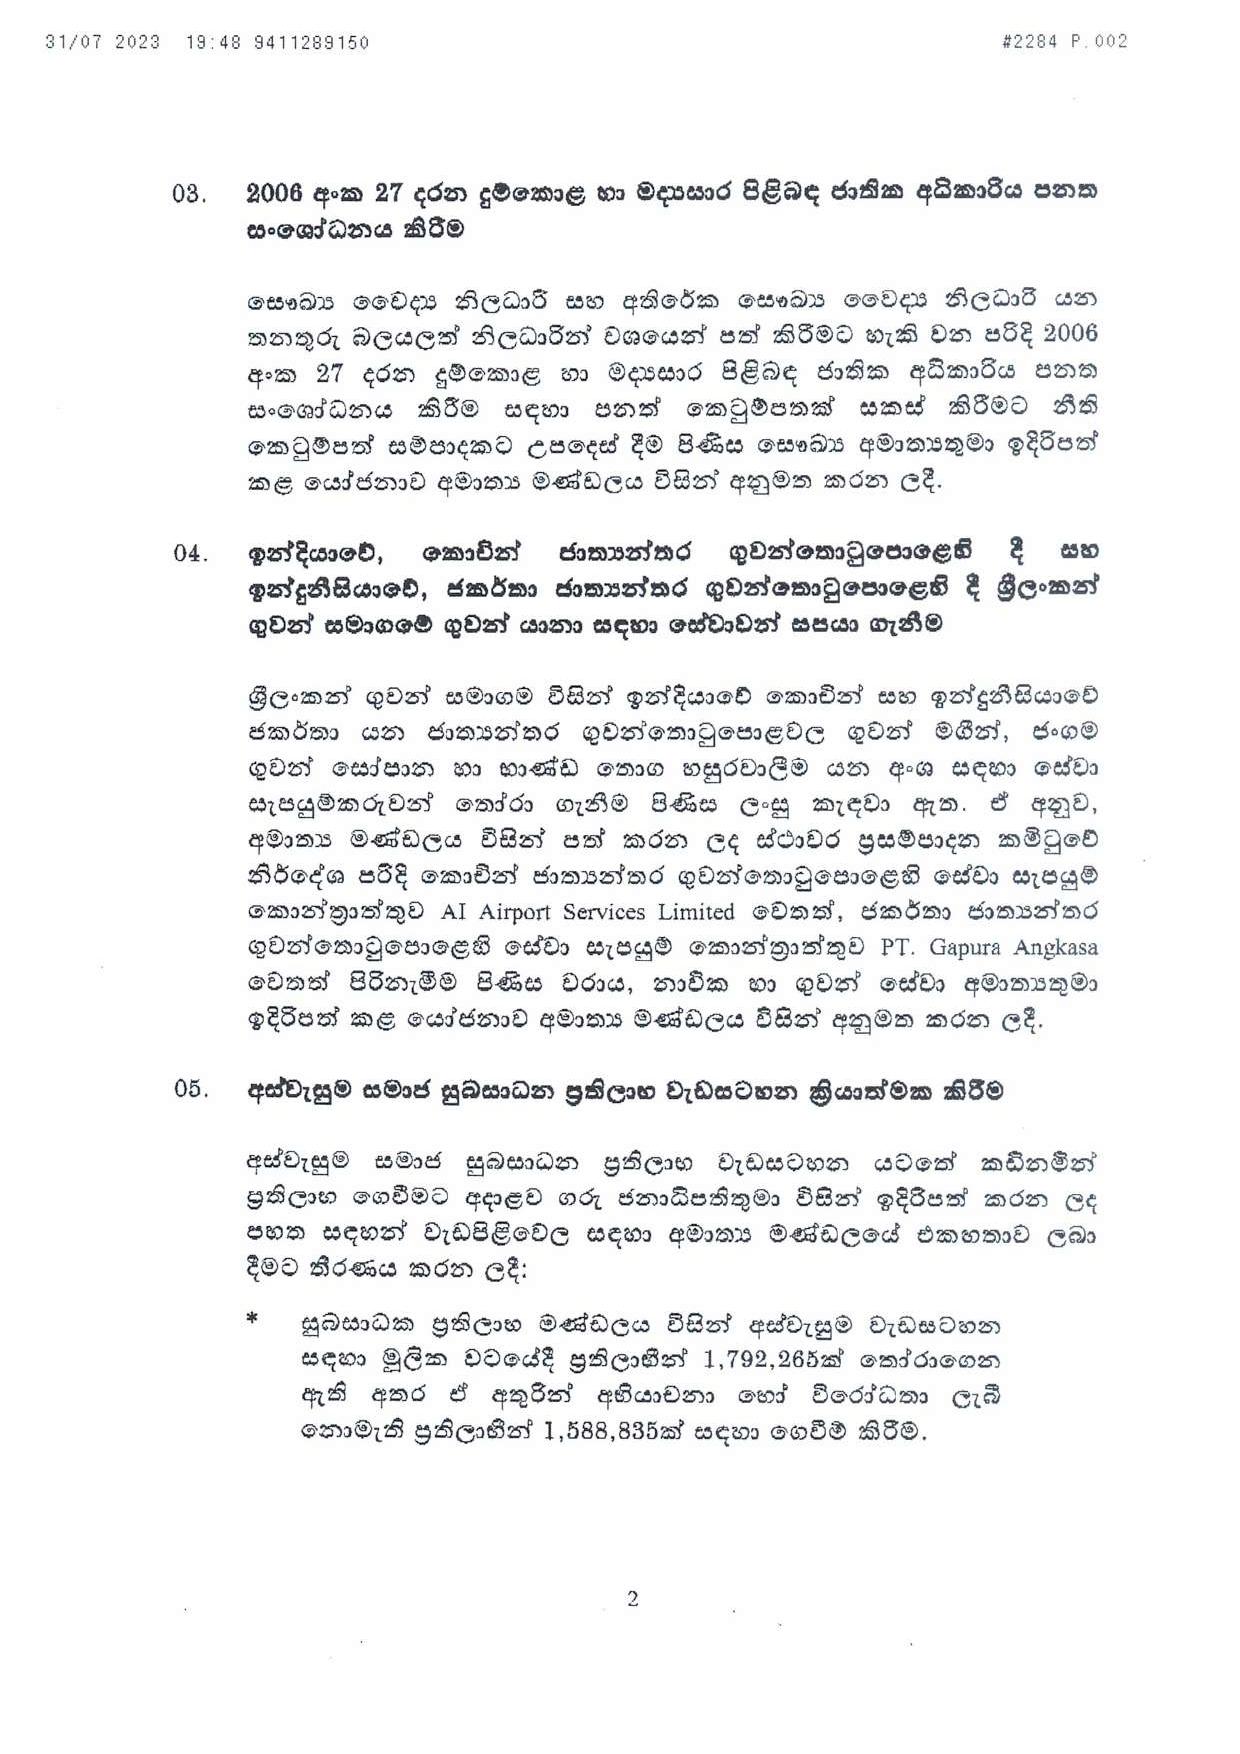 Cabinet Decision on 31.07.2023 1 page 002